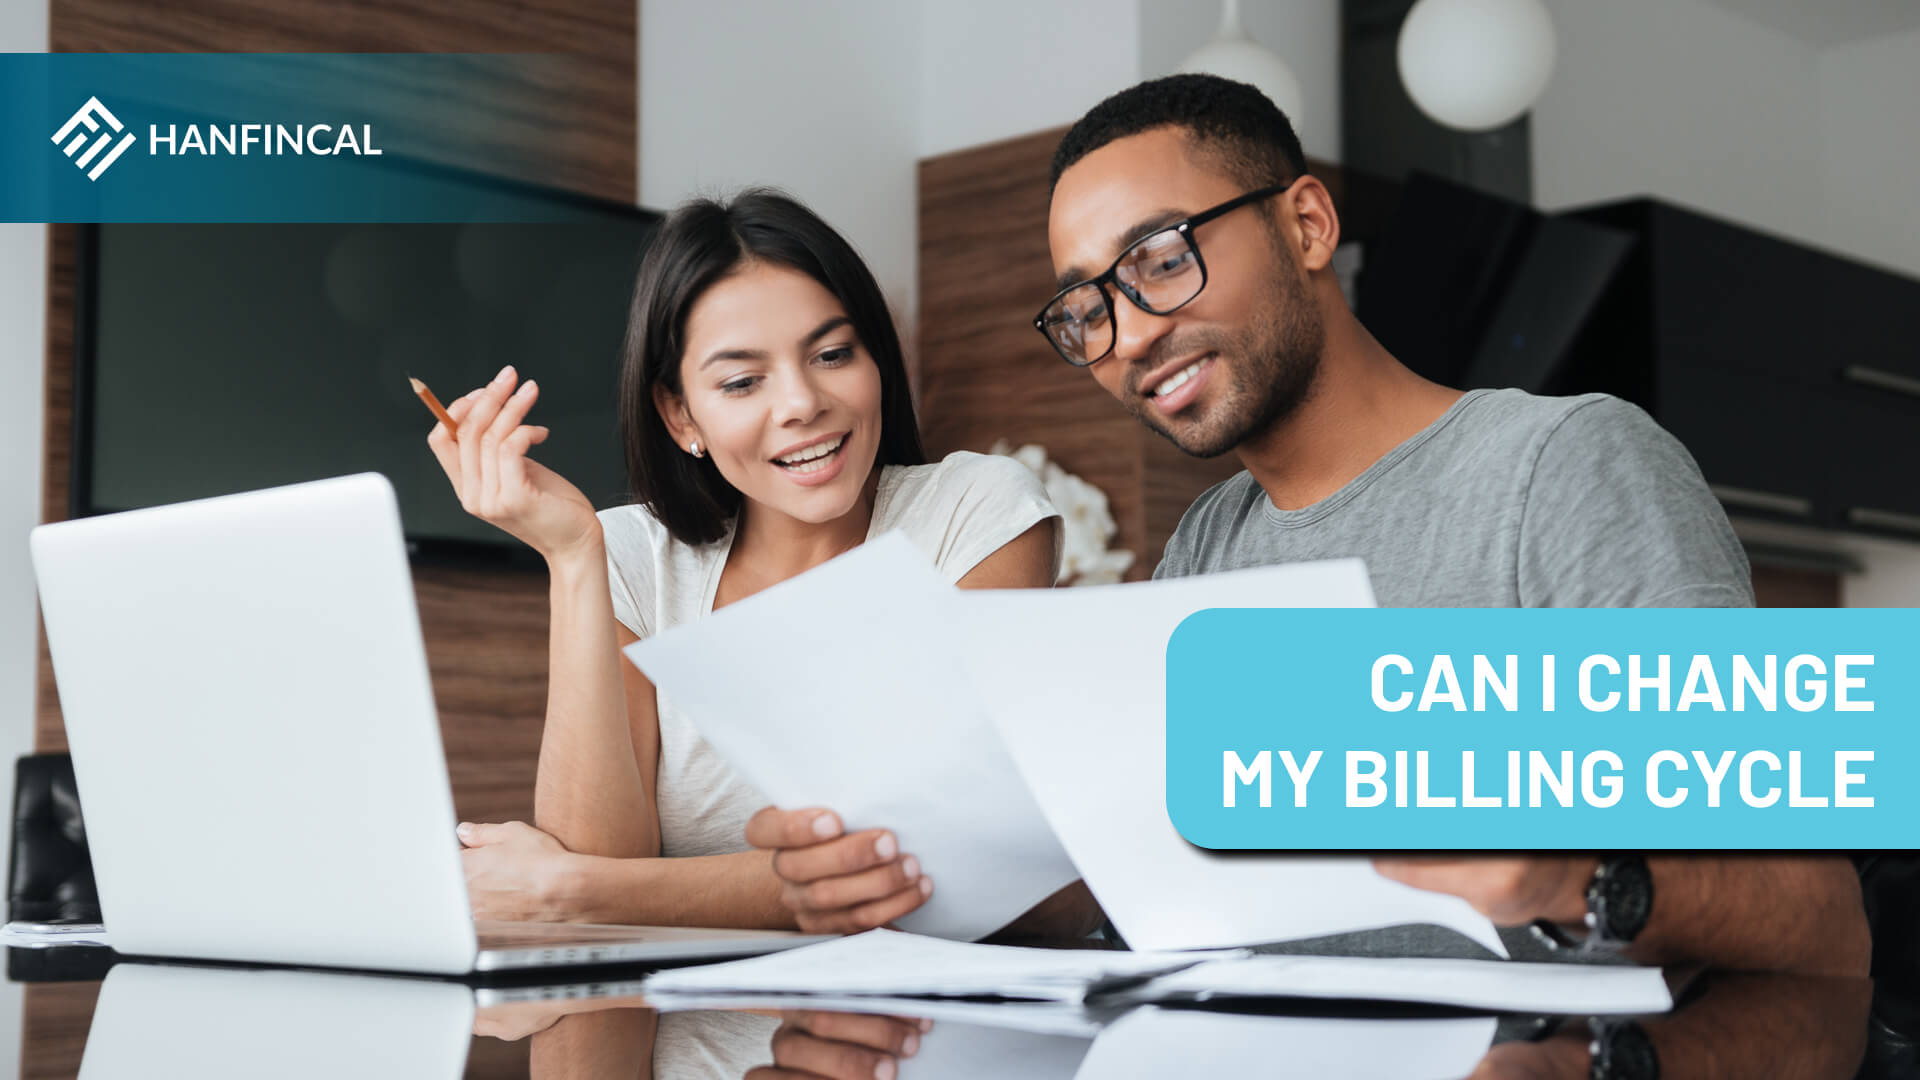 Can I change my billing cycle?